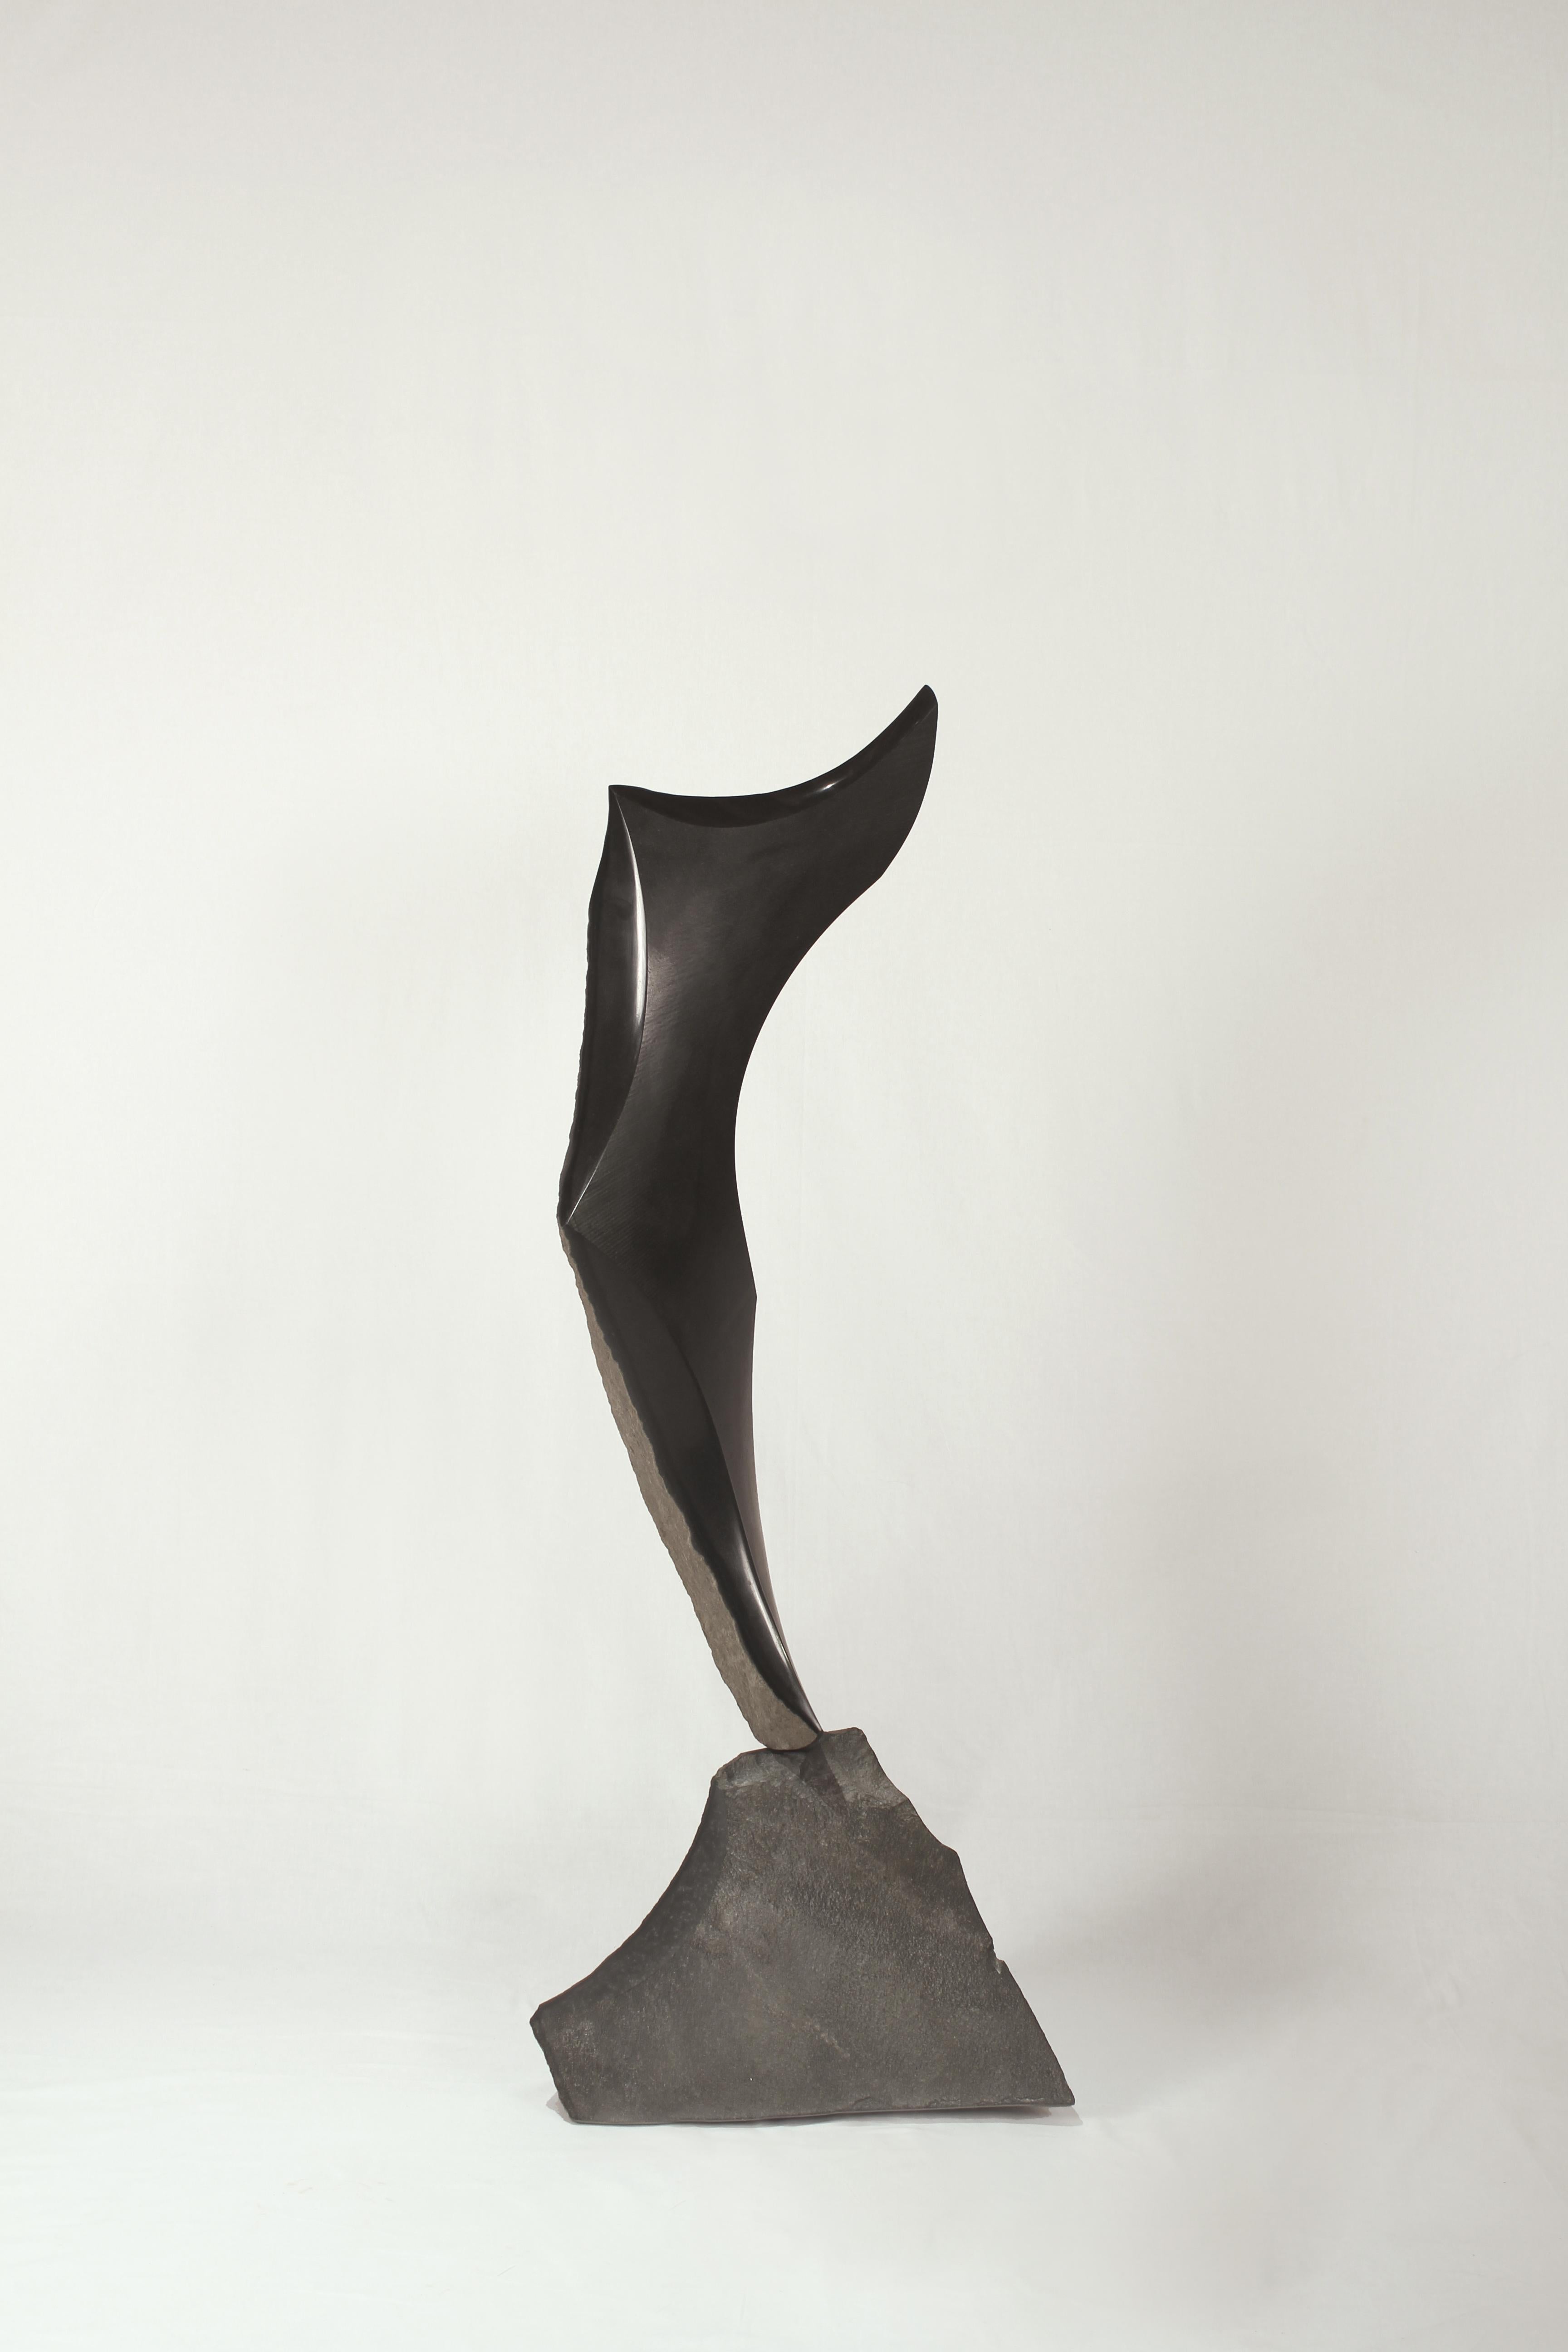 Will Robinson Abstract Sculpture - Enticement